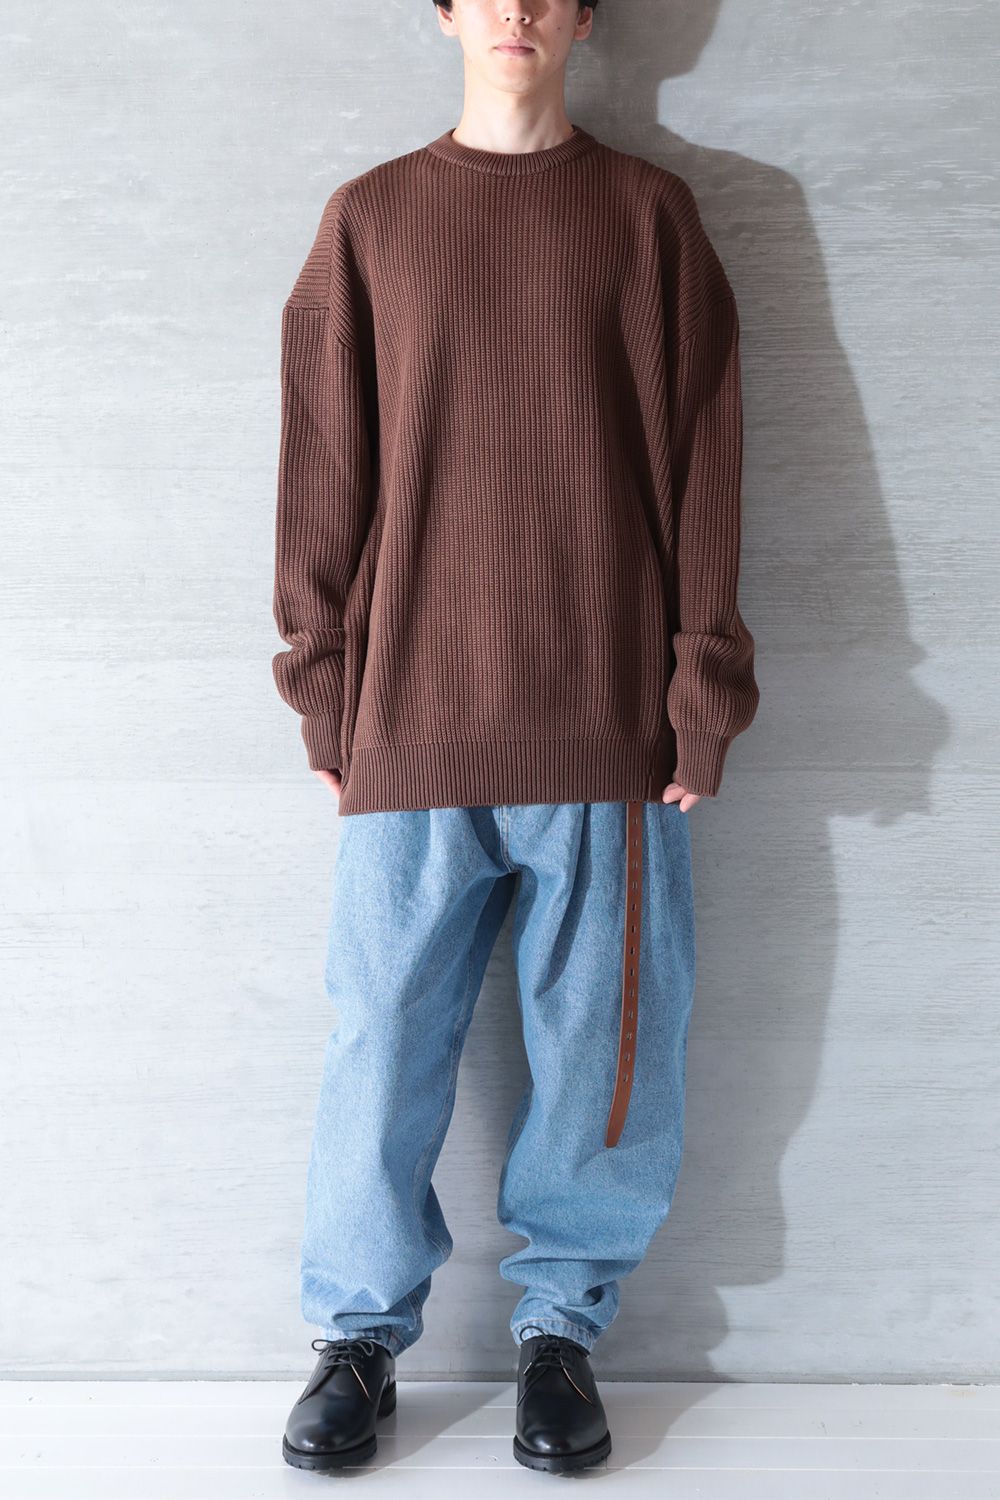 HED MAYNER - 【ラスト1点】TWISTED LONG SLEEVES SWEATER(TOBACCO